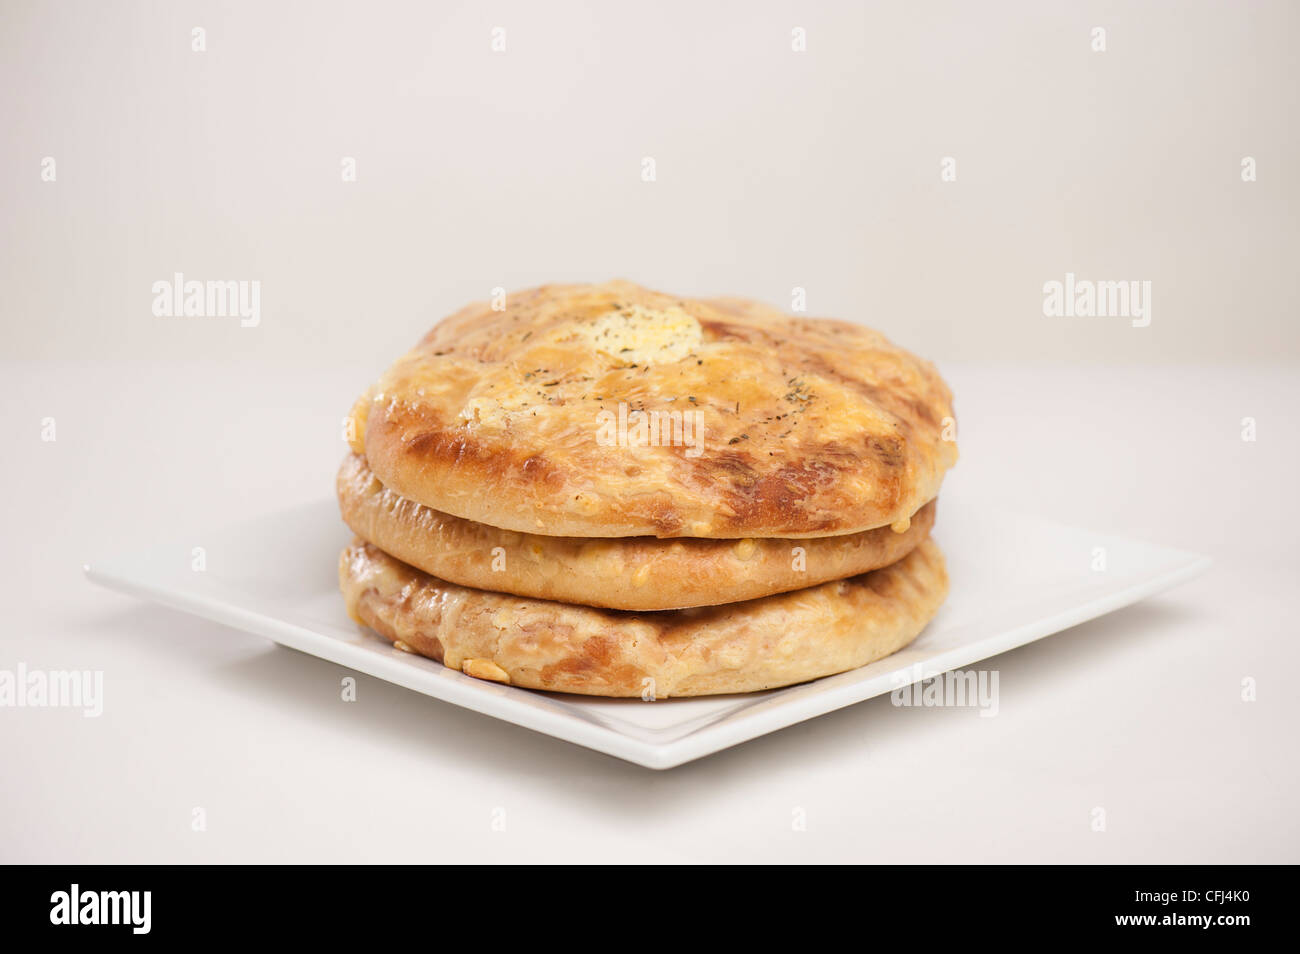 Khachapuri – a filled bread dish from Georgia. On round, white plate and light, clean background. Stock Photo